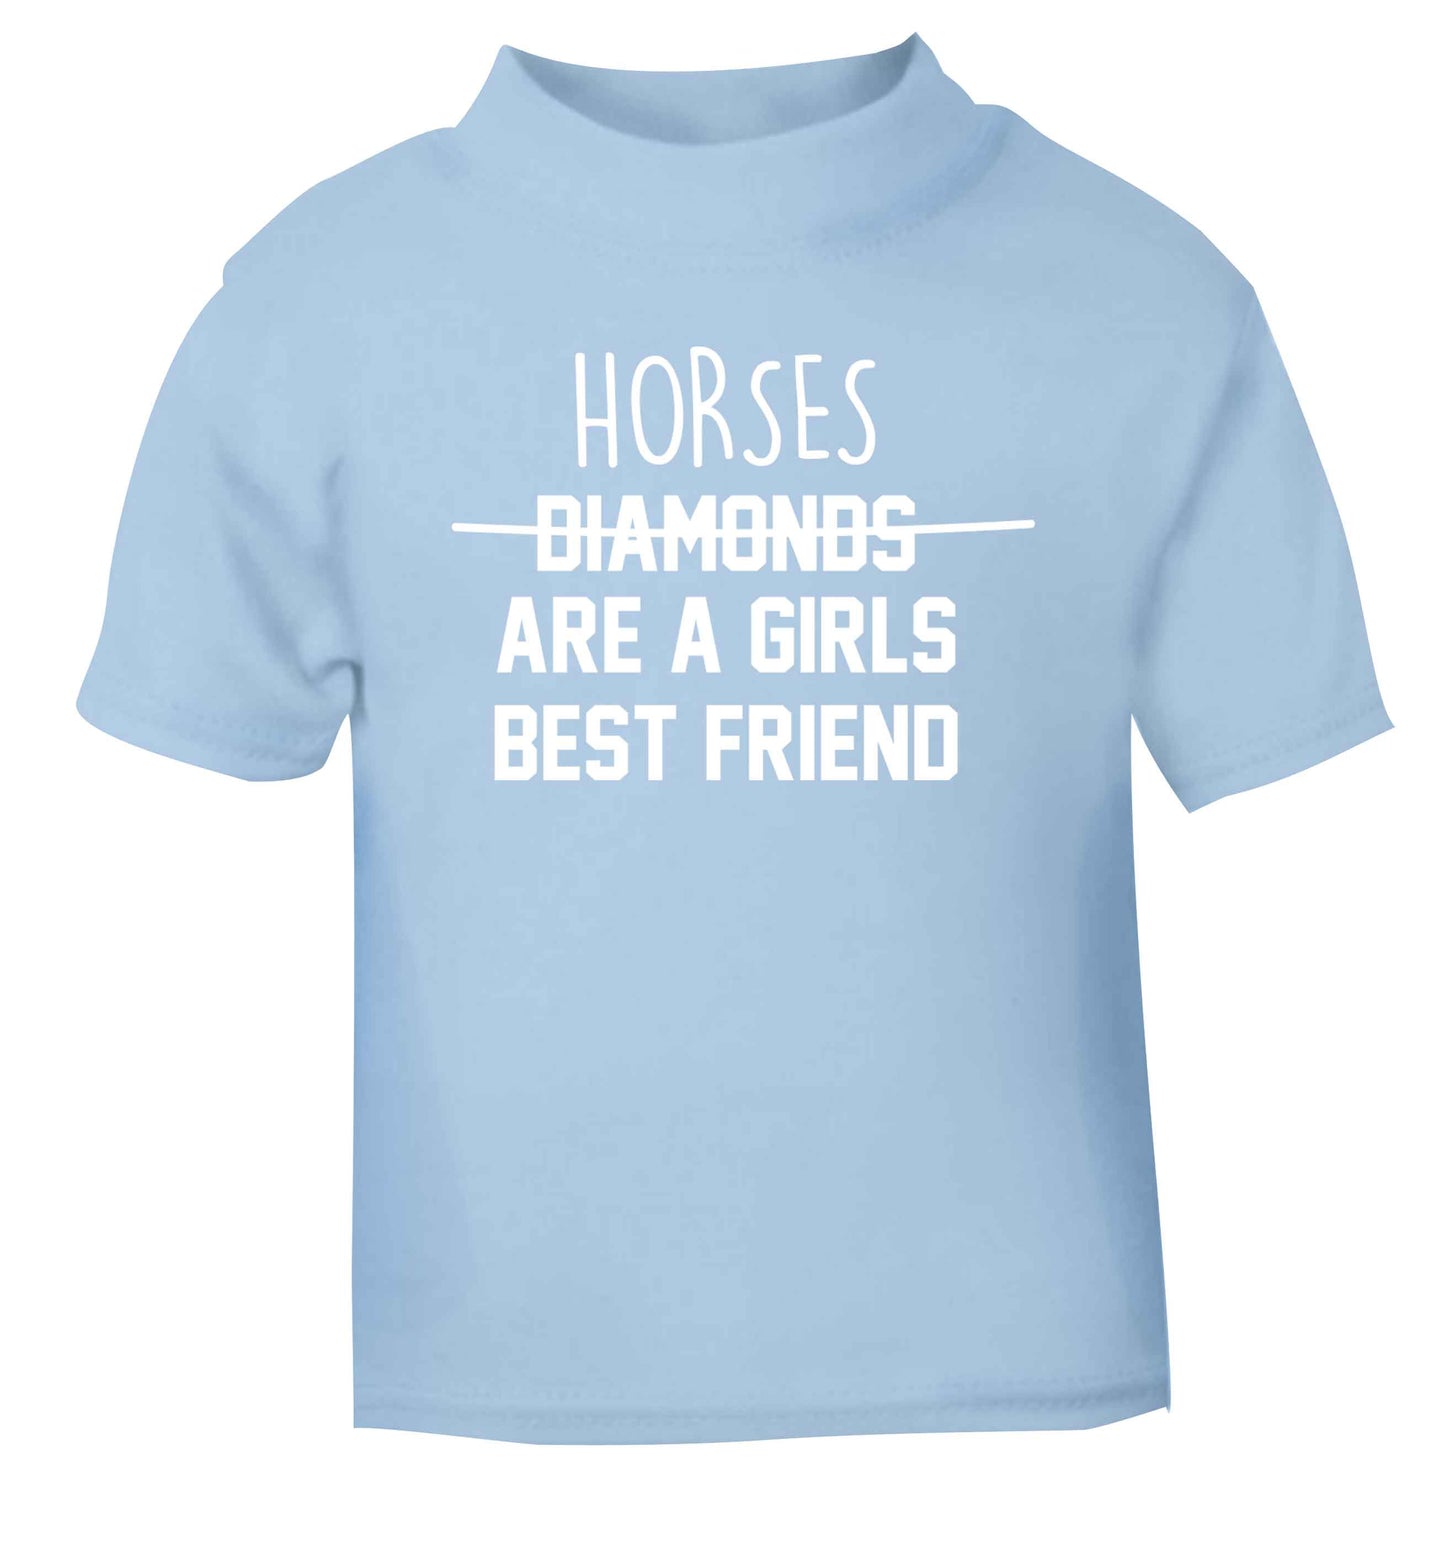 Horses are a girls best friend light blue baby toddler Tshirt 2 Years